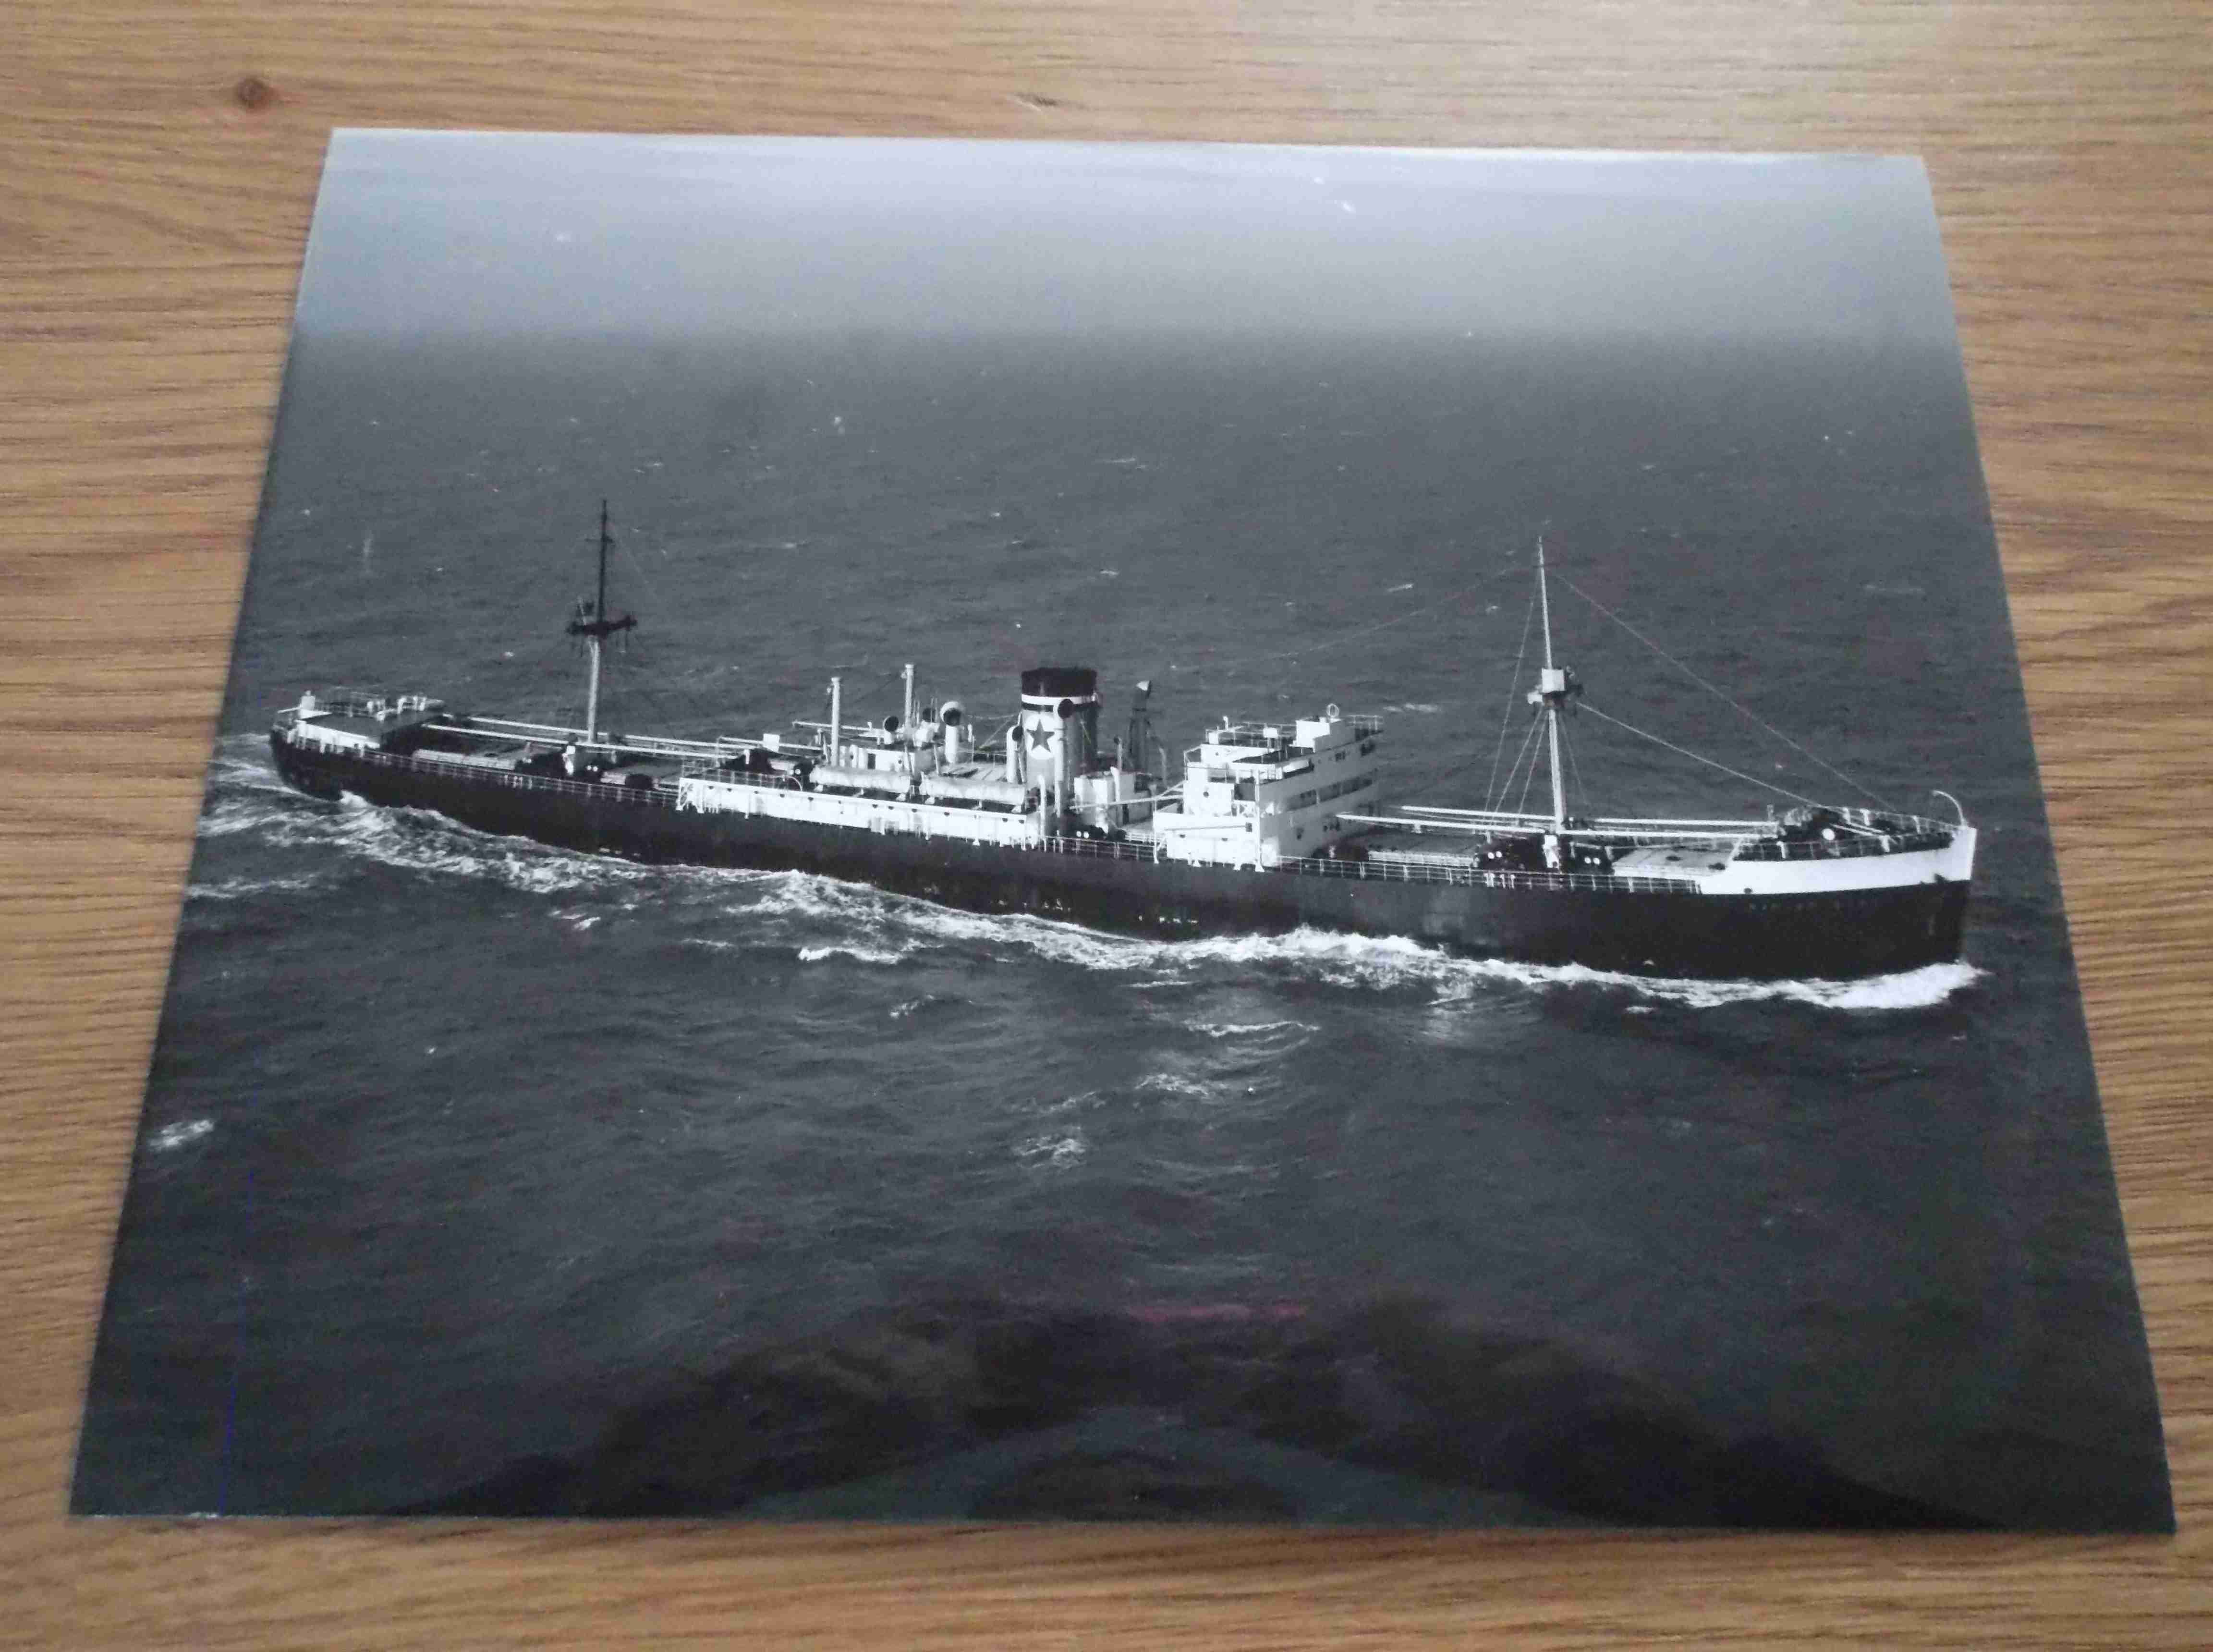 LARGE B/W PHOTOGRAPH OF THE BLUE STAR LINE VESSEL THE NAPIER STAR